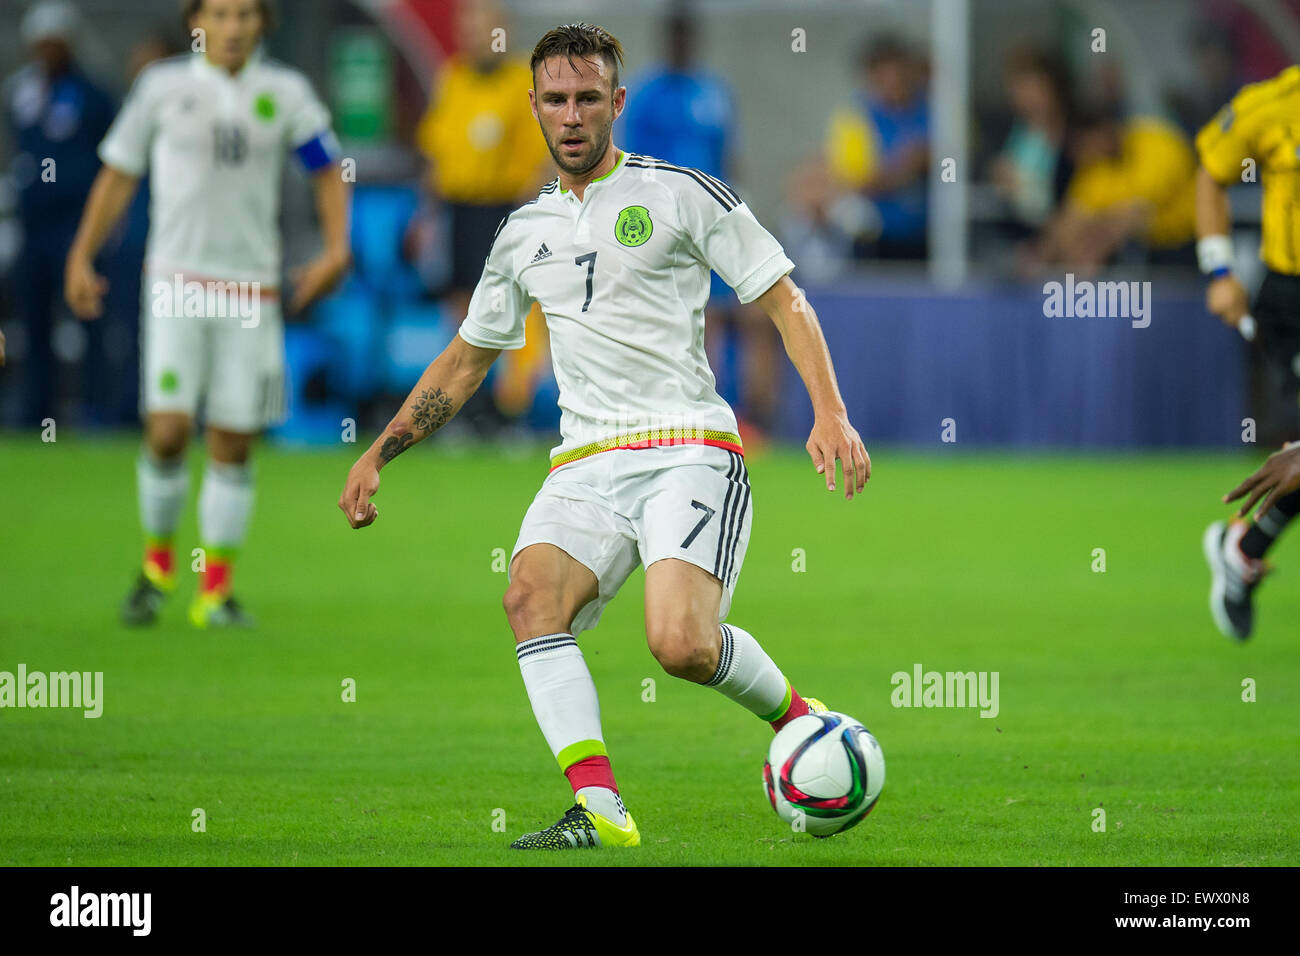 July 1, 2015: Mexico defender Miguel Layun (7) controls the ball during the 2nd half of an international soccer match between Honduras and Mexico at NRG Stadium in Houston, TX. The game ended in a 0-0 draw.Trask Smith/CSM Stock Photo